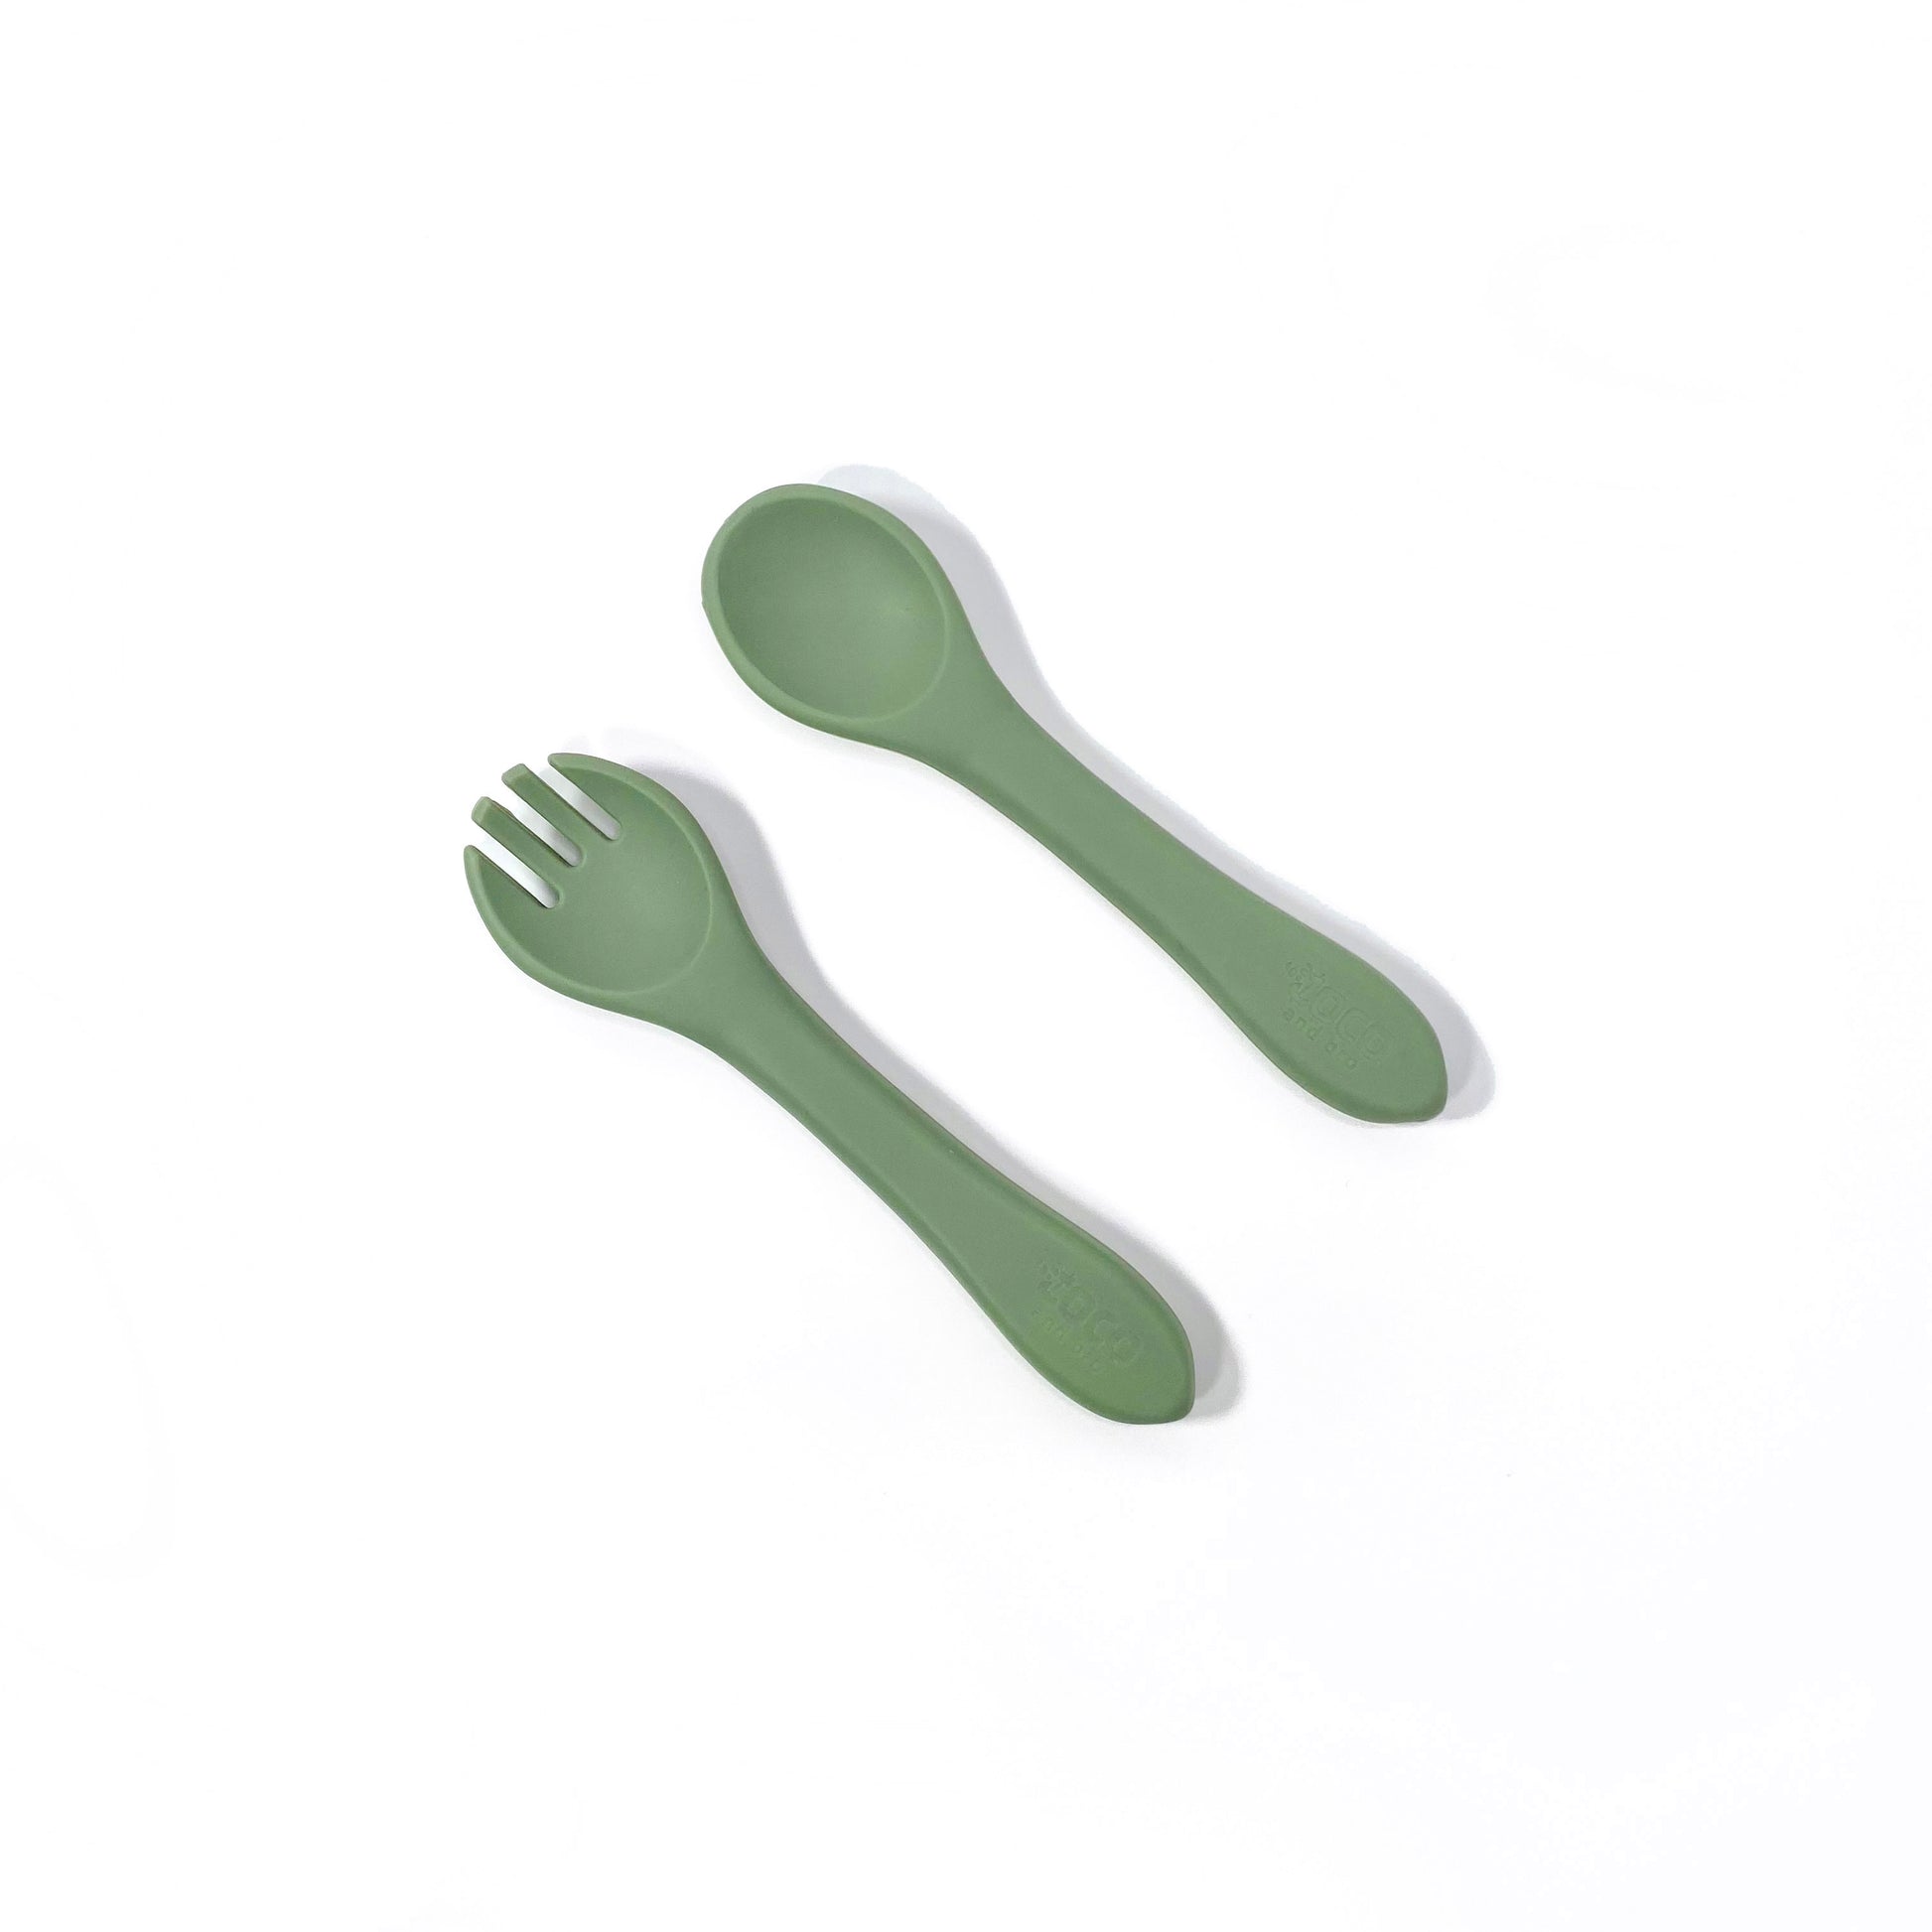 A set of forest green silicone children’s cutlery.